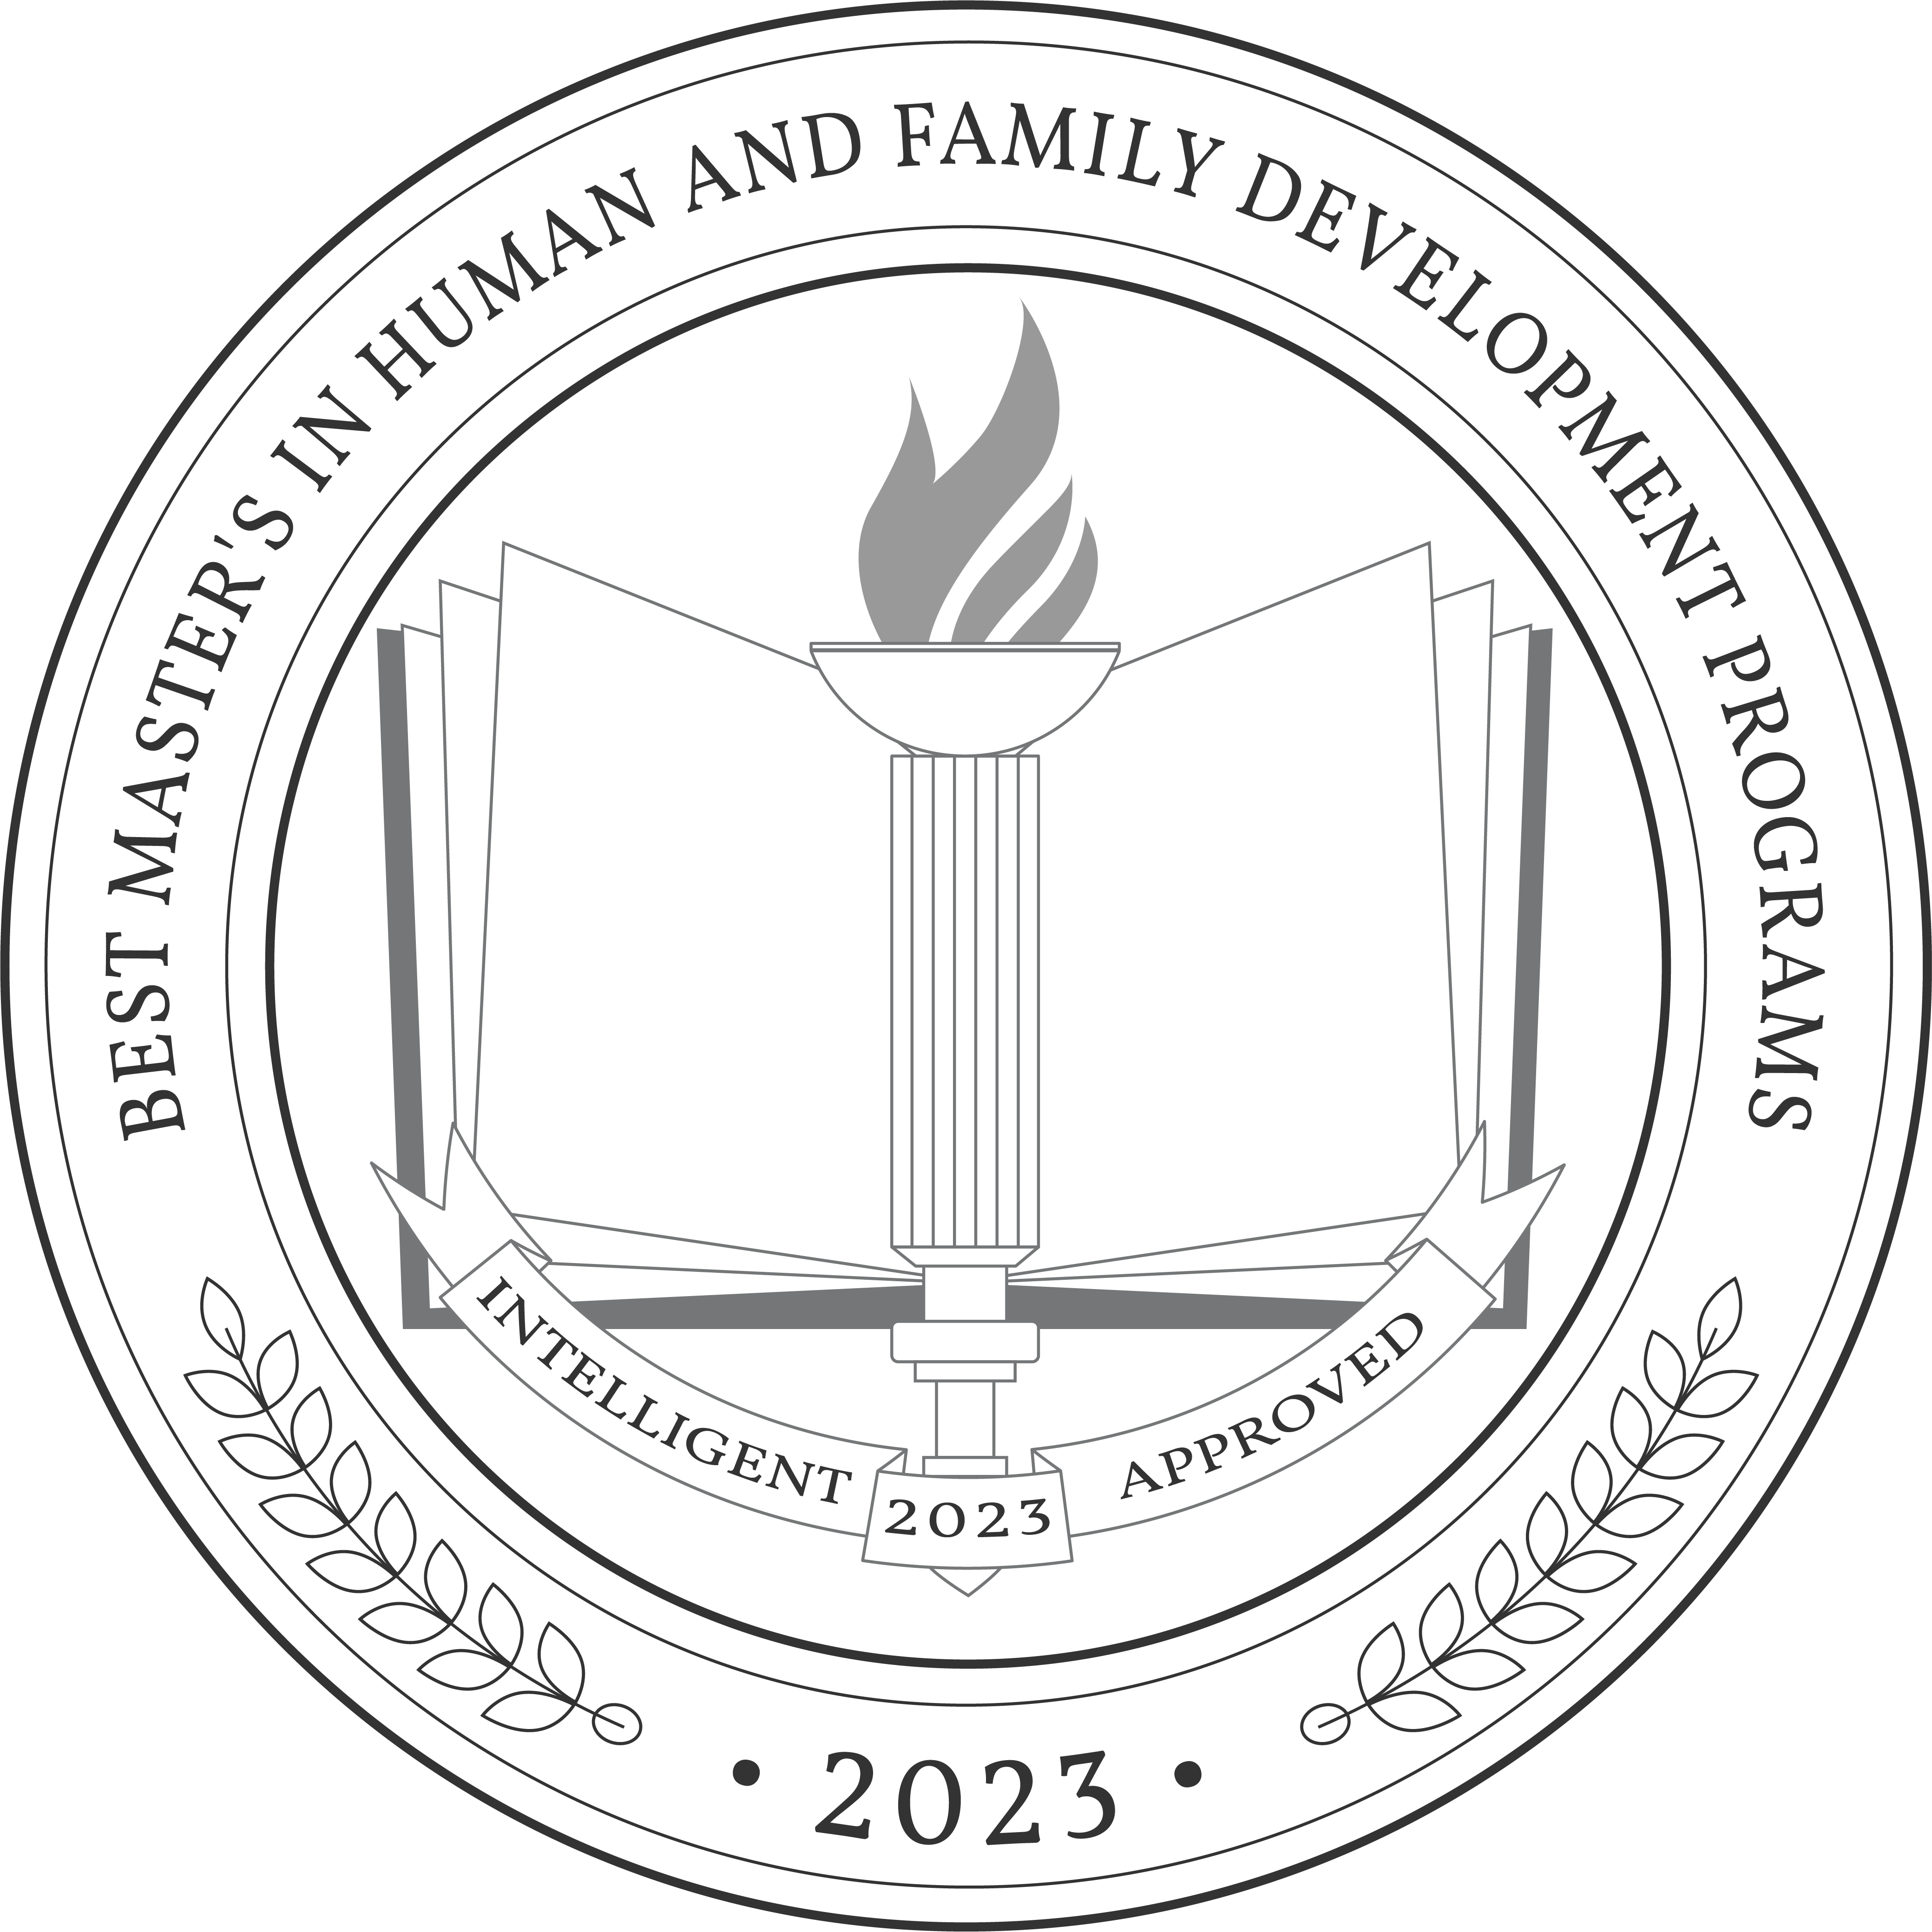 Best Master's in Human And Family Development Programs badge